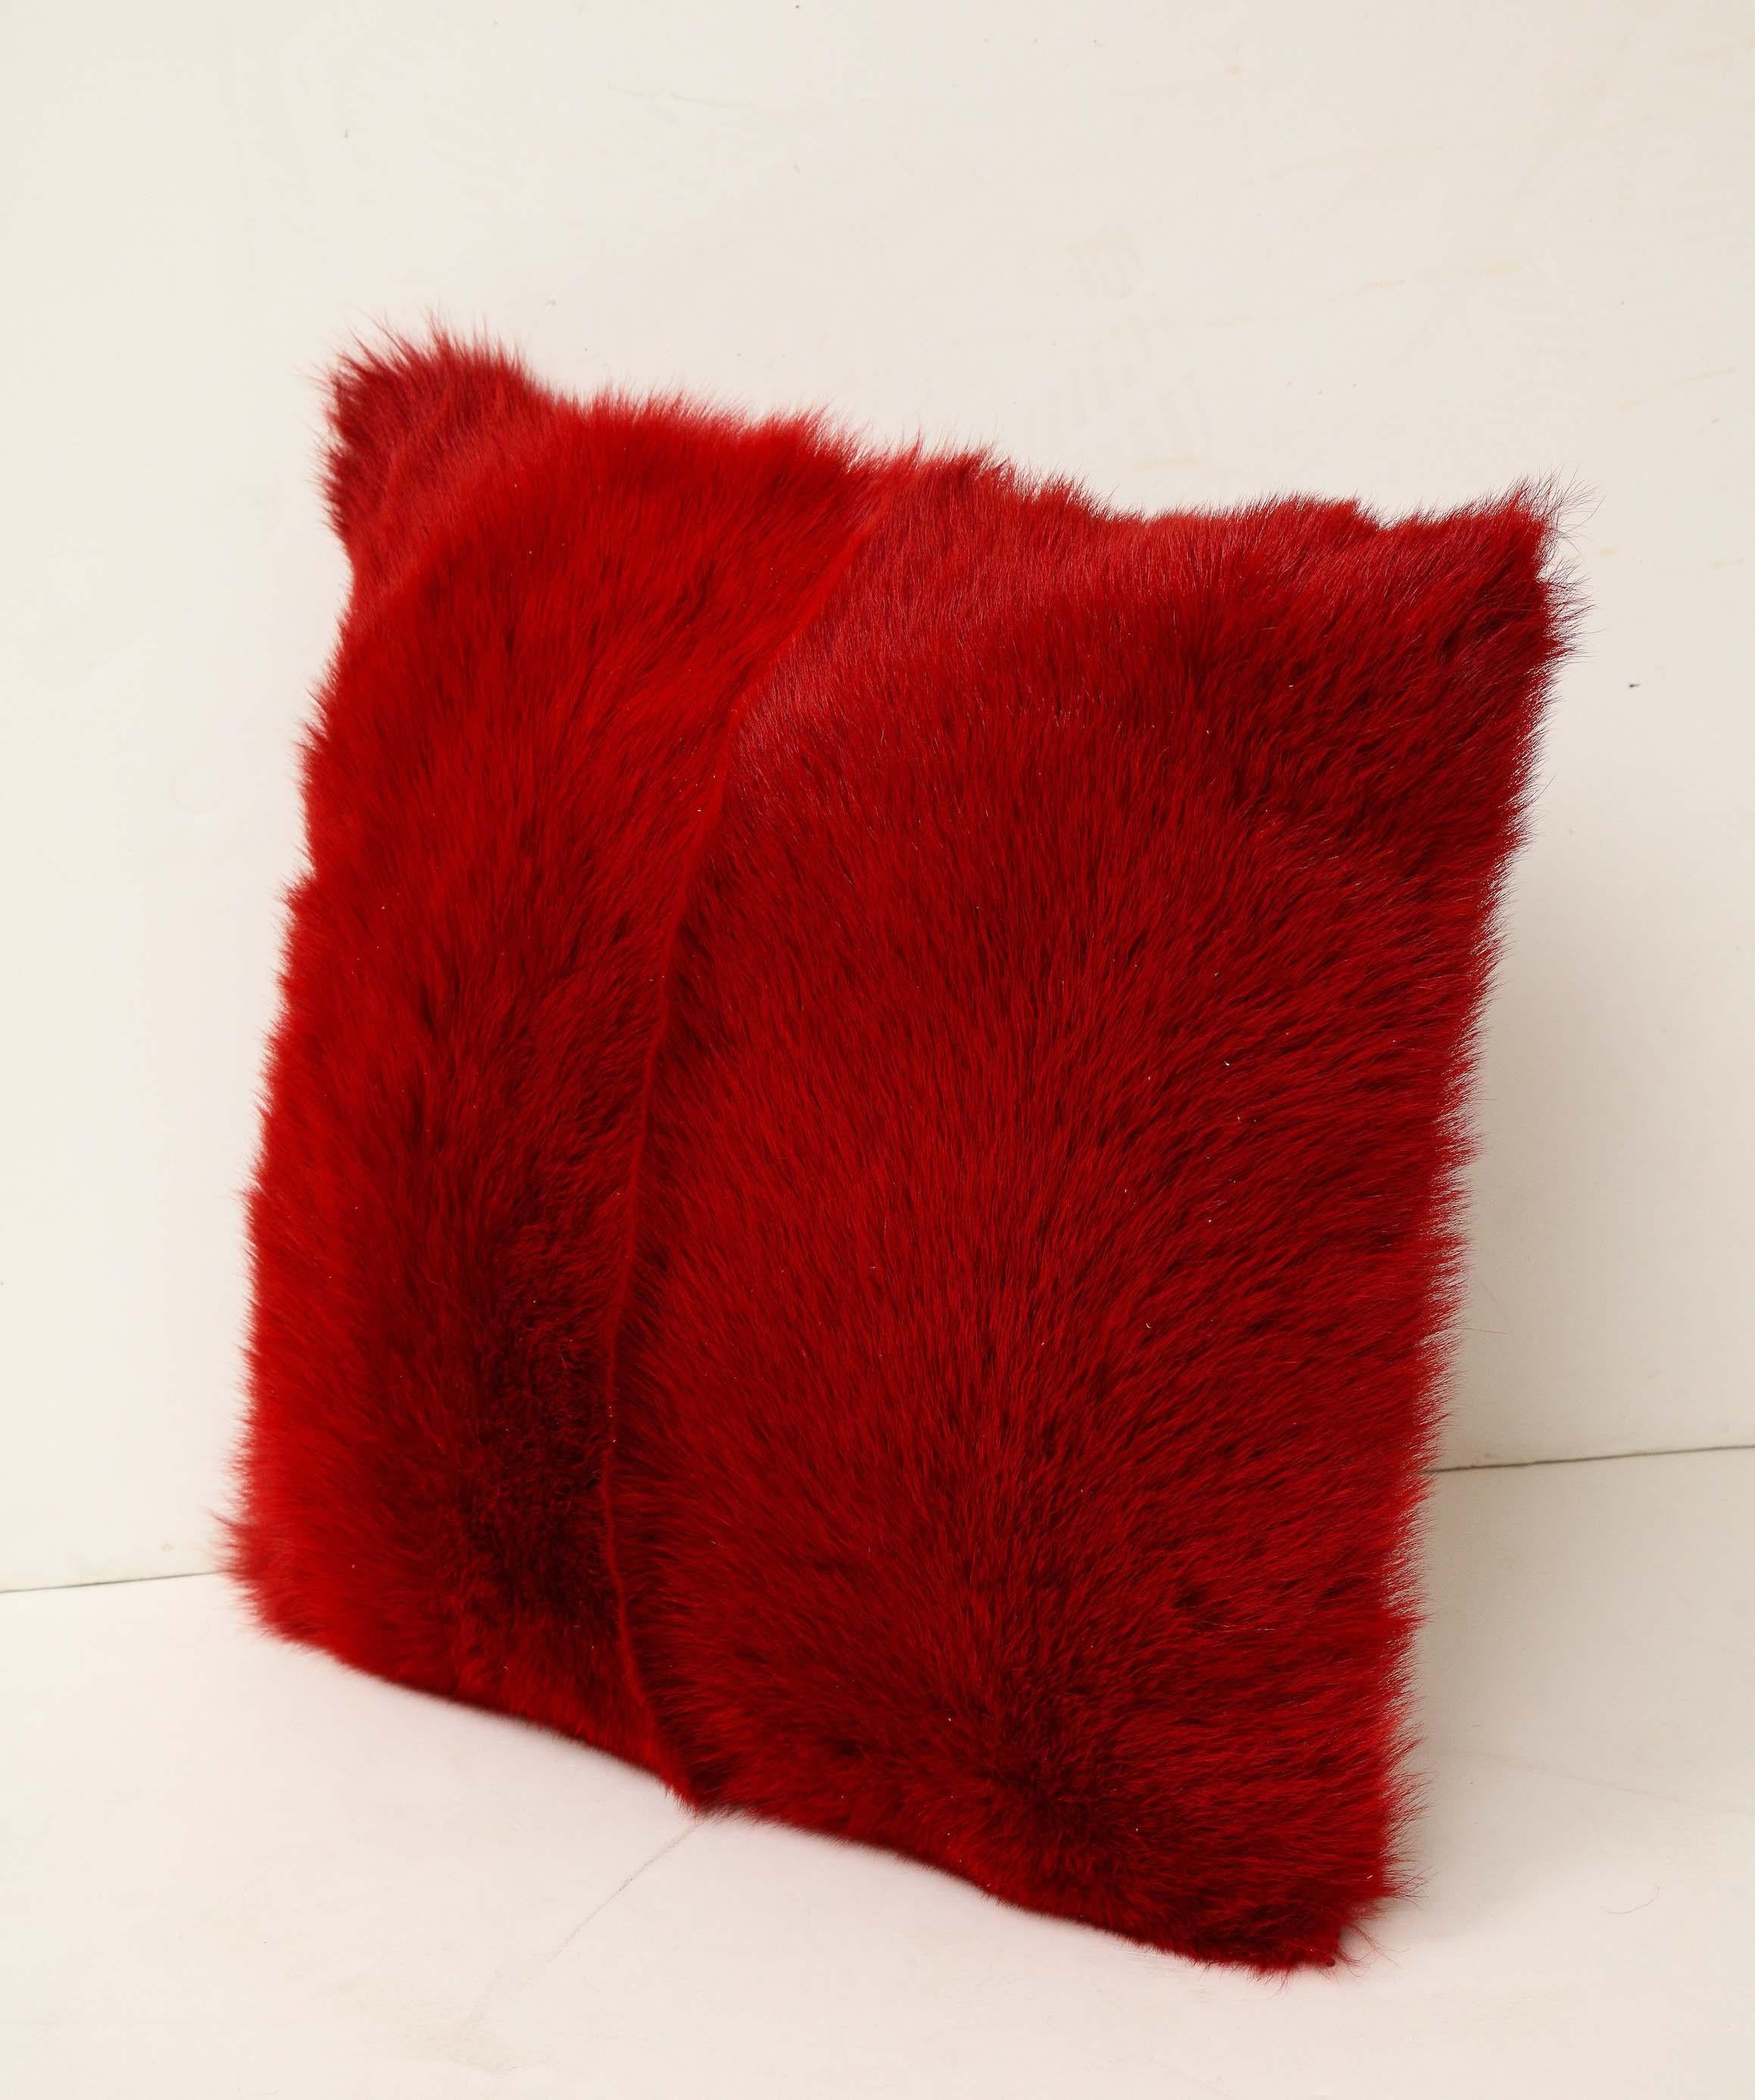 Custom ravishing Toscana long hair shearling pillow in red color with matching red colored leather backing. Soft and smooth in touch. It is made of genuine shearing with a zipper enclosure in a matching color, filled with down and feather, and 18